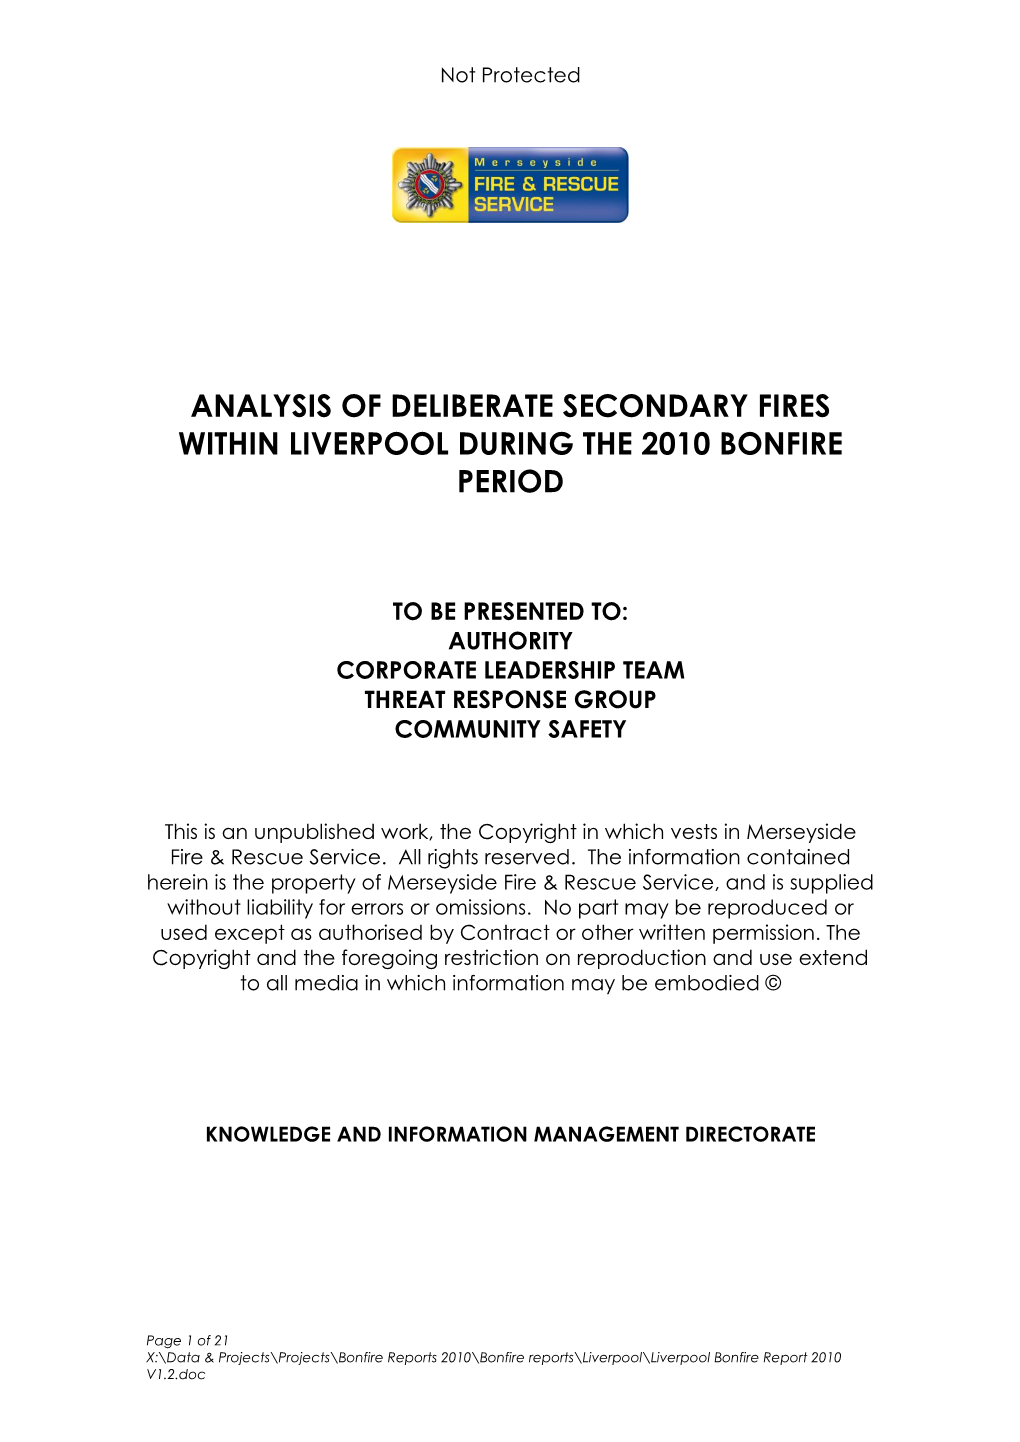 Analysis of Deliberate Secondary Fires Within Liverpool During the 2010 Bonfire Period